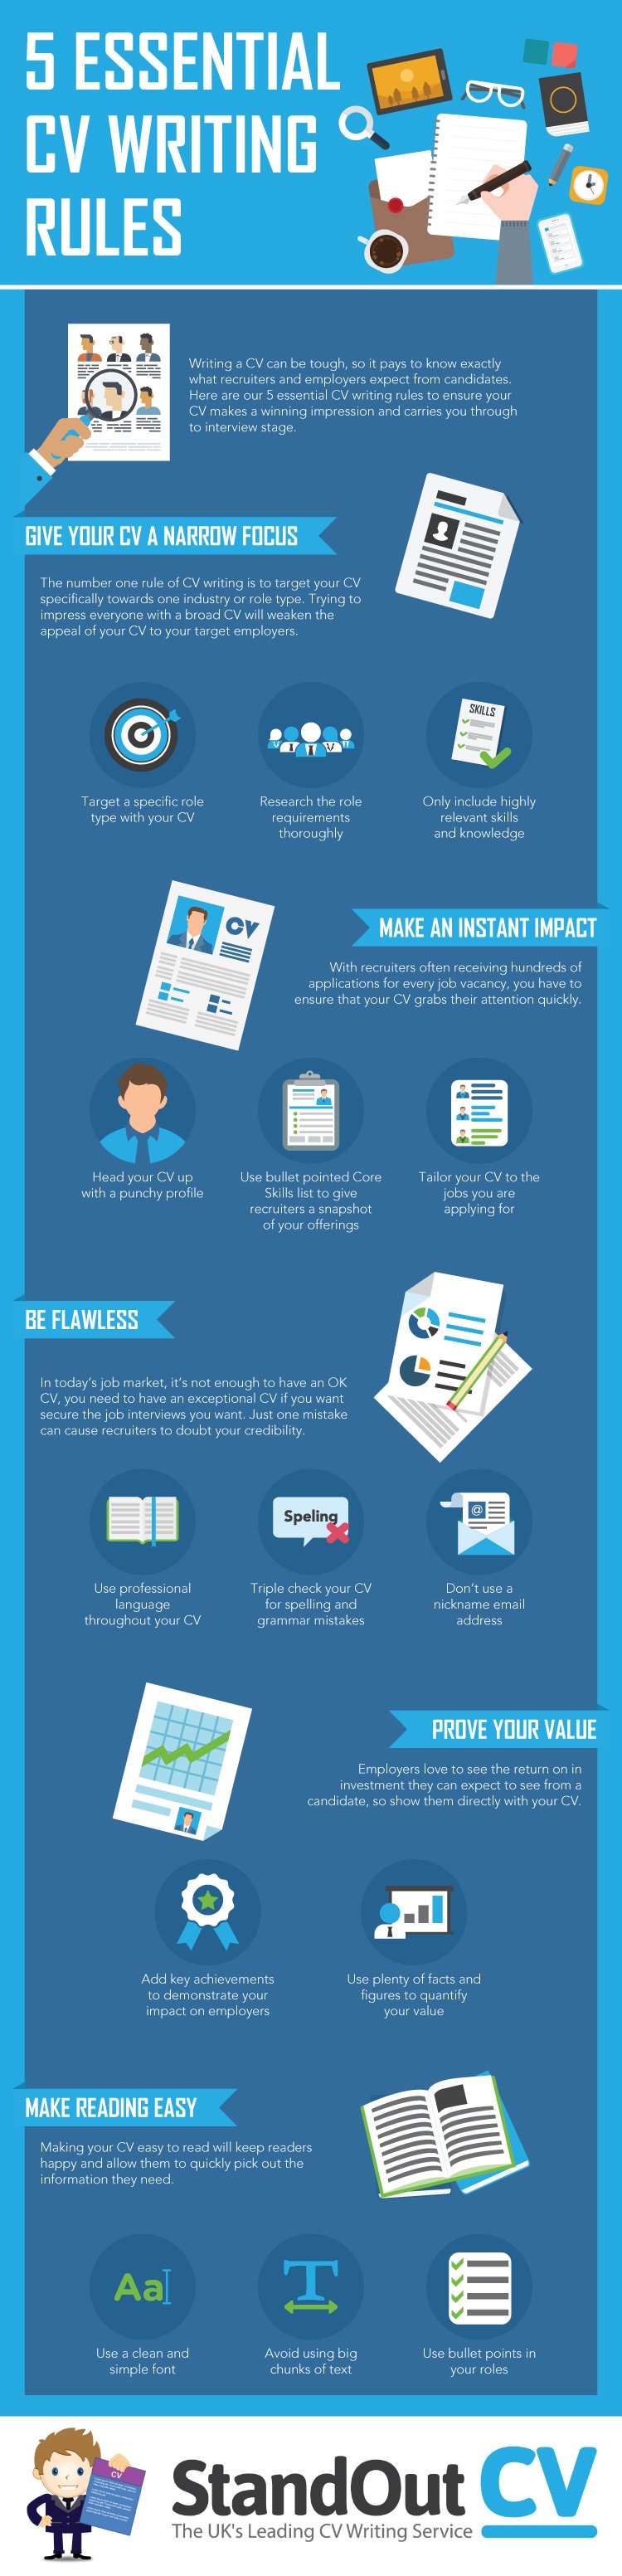 5 Essential CV Writing Rules Infographic